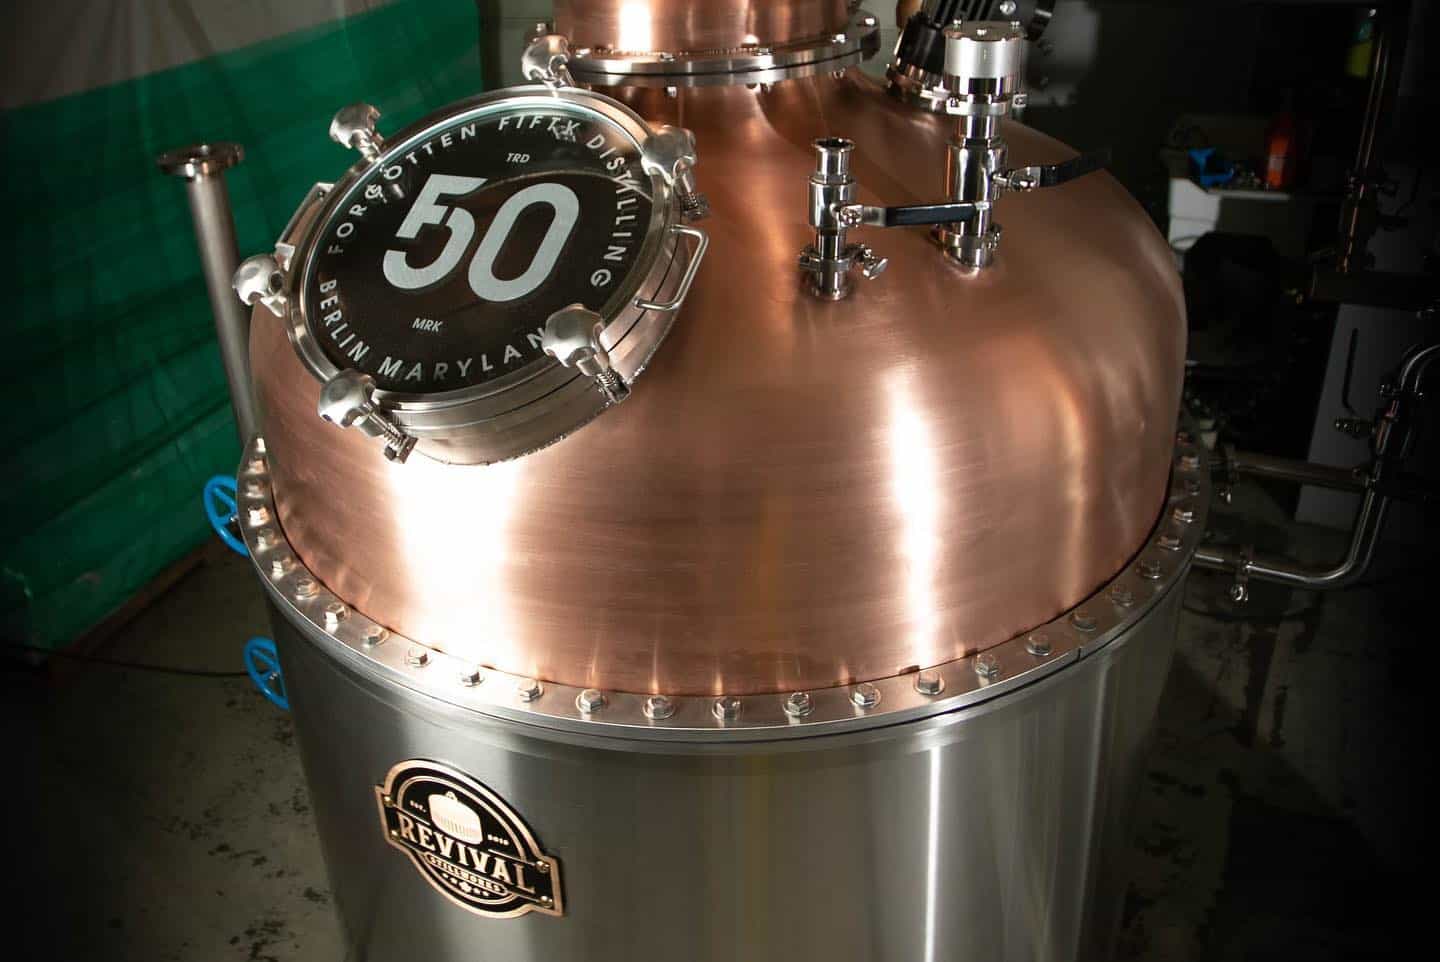 High-quality 'Forgotten 50 Distillery Equipment' showcasing the state-of-the-art machinery and tools used in the production of artisanal spirits at Forgotten 50 Distillery.